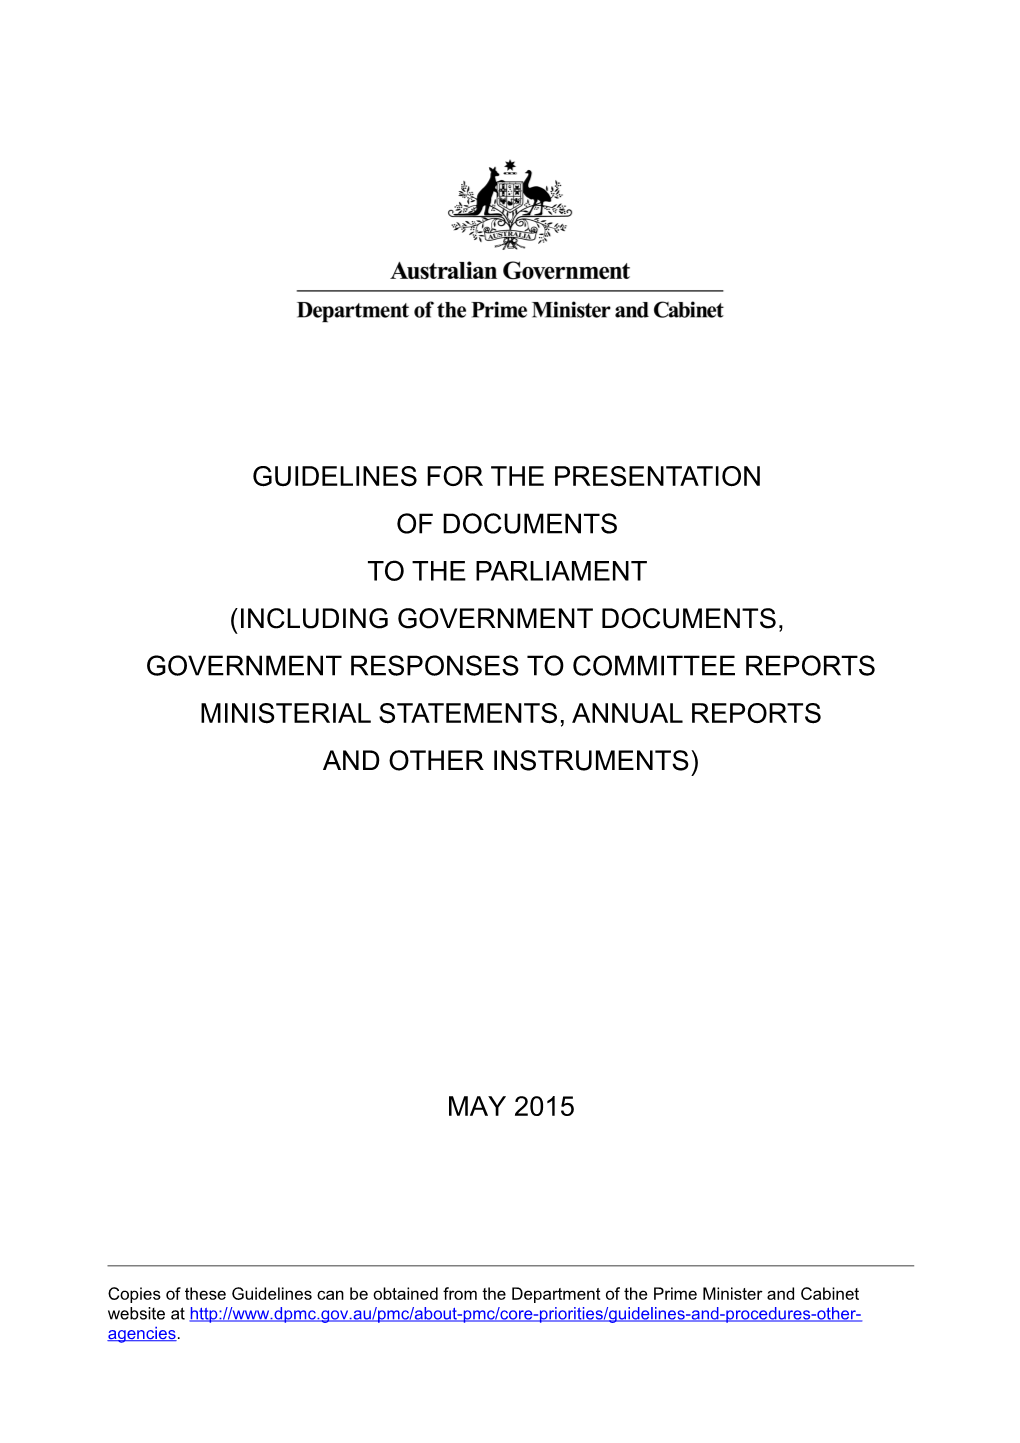 Guidelines for the Presentation of Documents to the Parliament